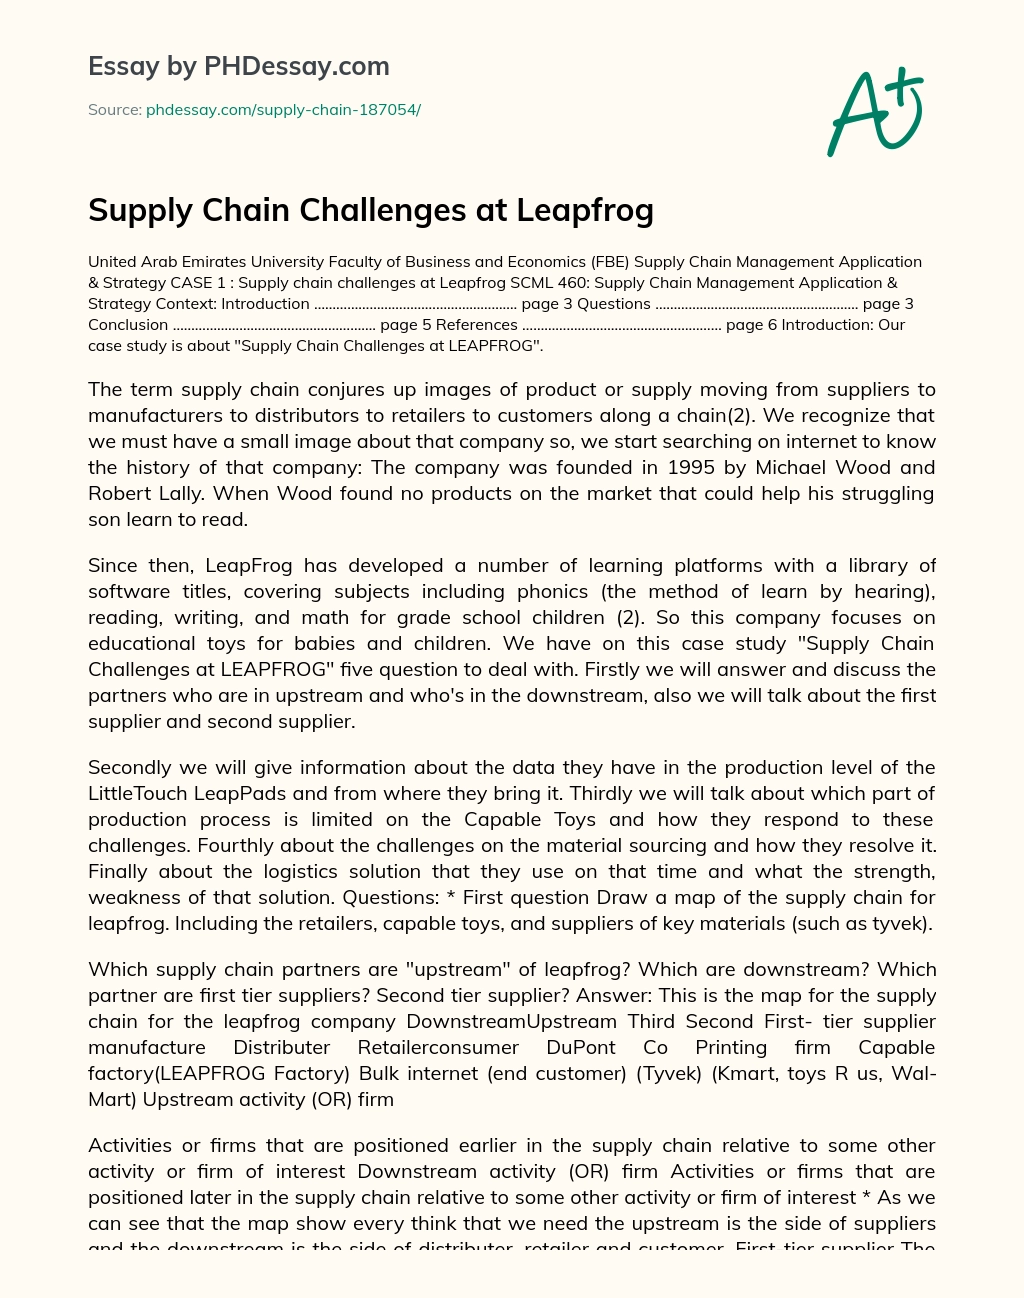 Supply Chain Challenges at Leapfrog essay